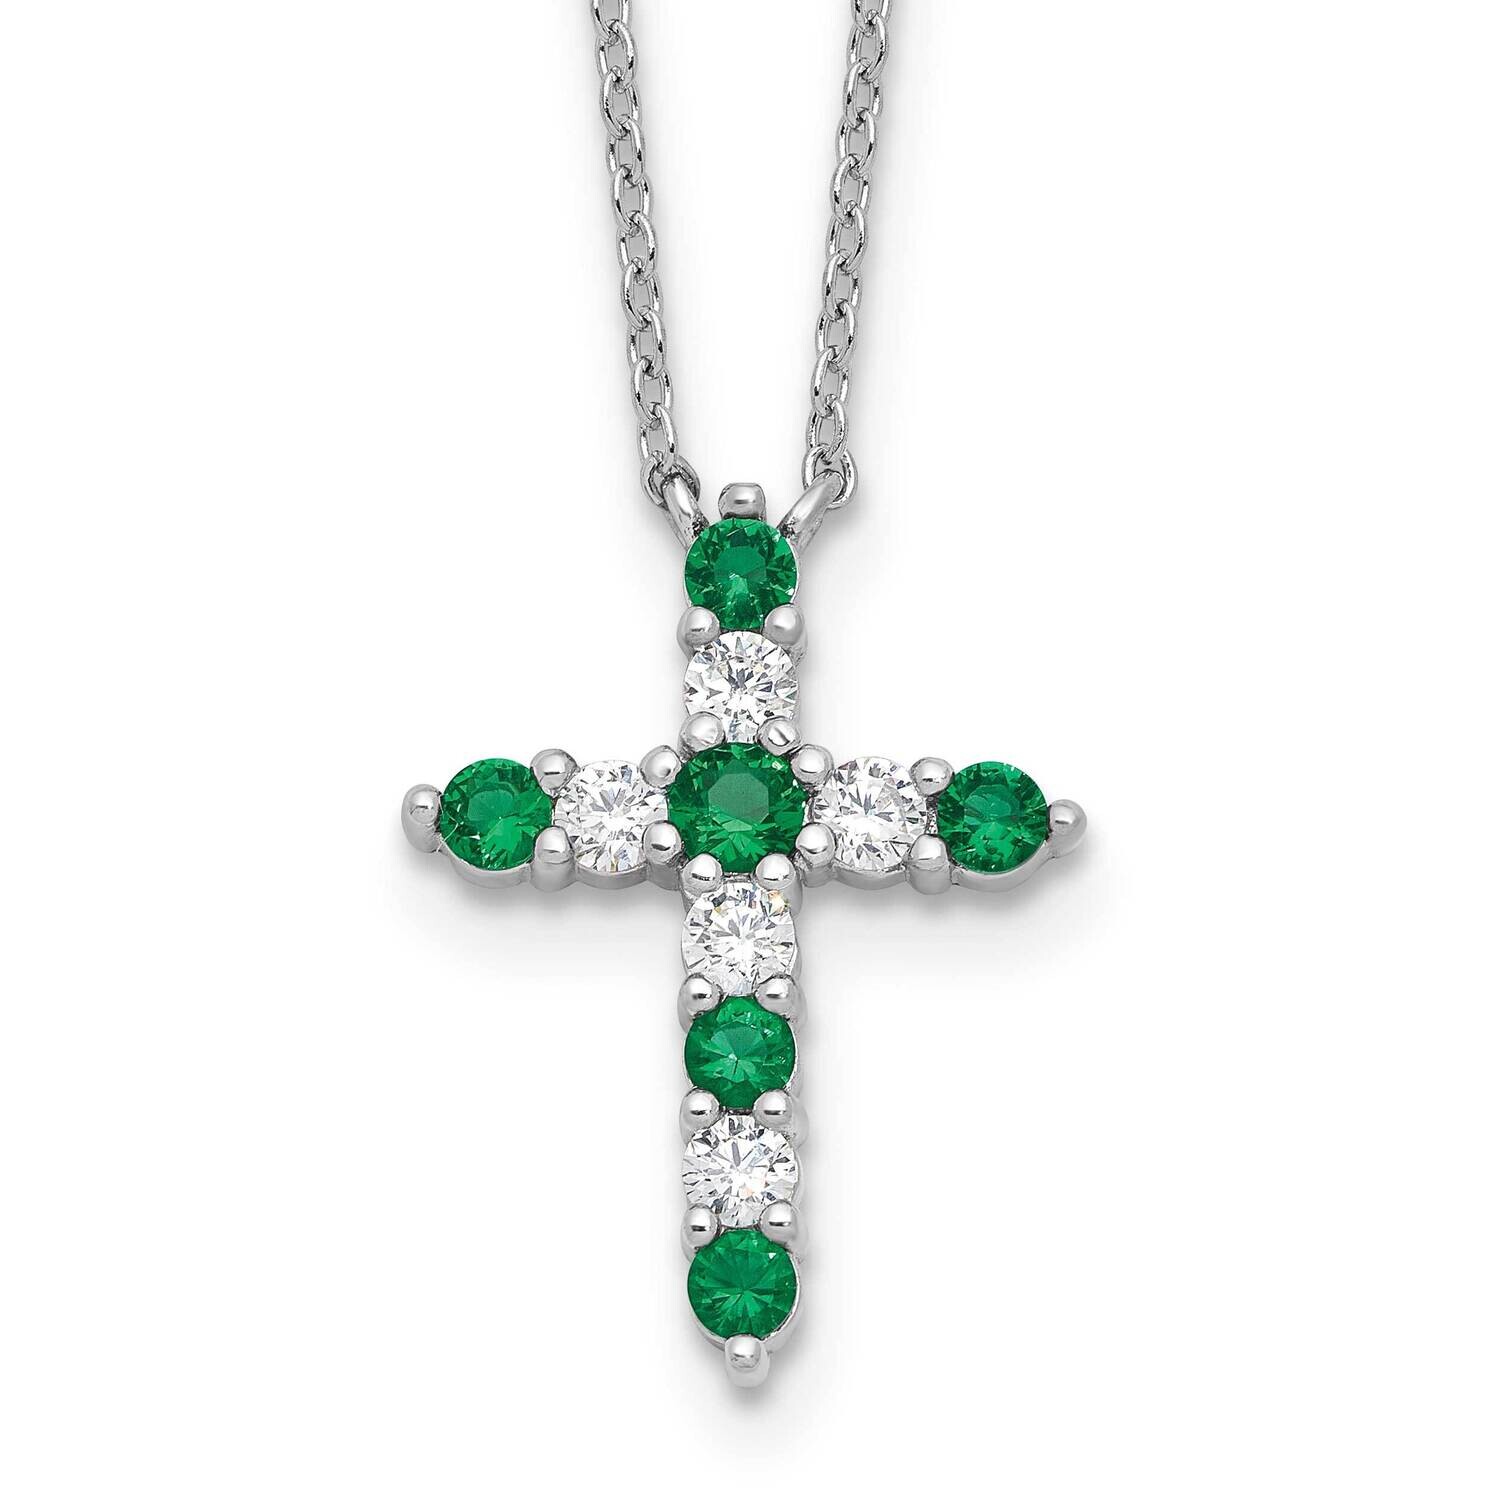 Green CZ May Birthstone Cross 2 Inch Extension Necklace Sterling Silver Rhodium-Plated QBPD36MAY